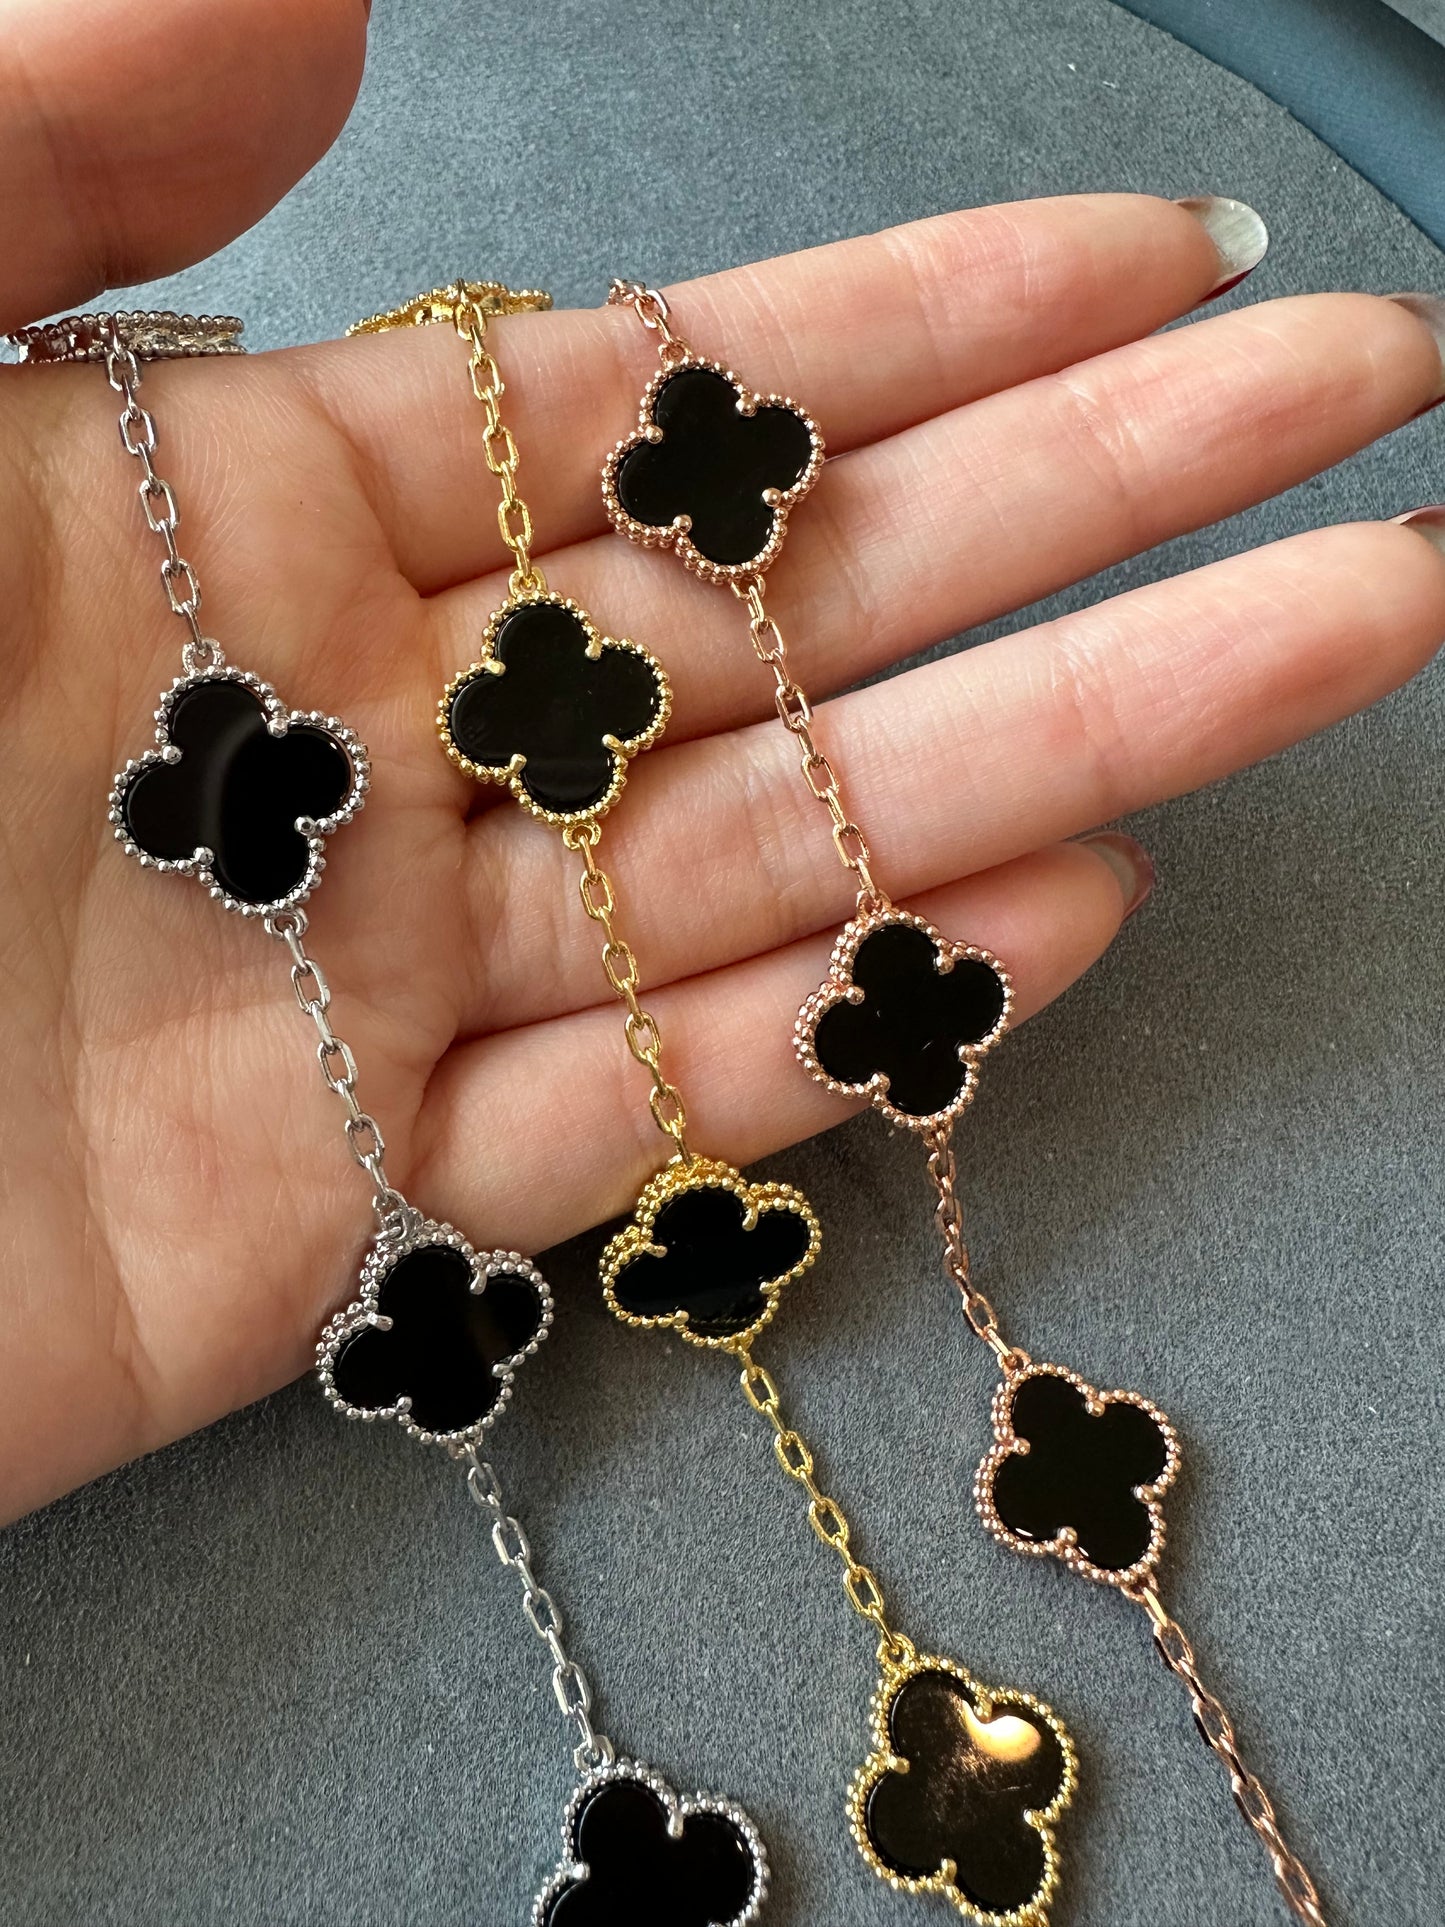 15mm Onyx 5 motifs clover bracelet 925 silver with 18k gold plated 7.5 inches - ParadiseKissCo